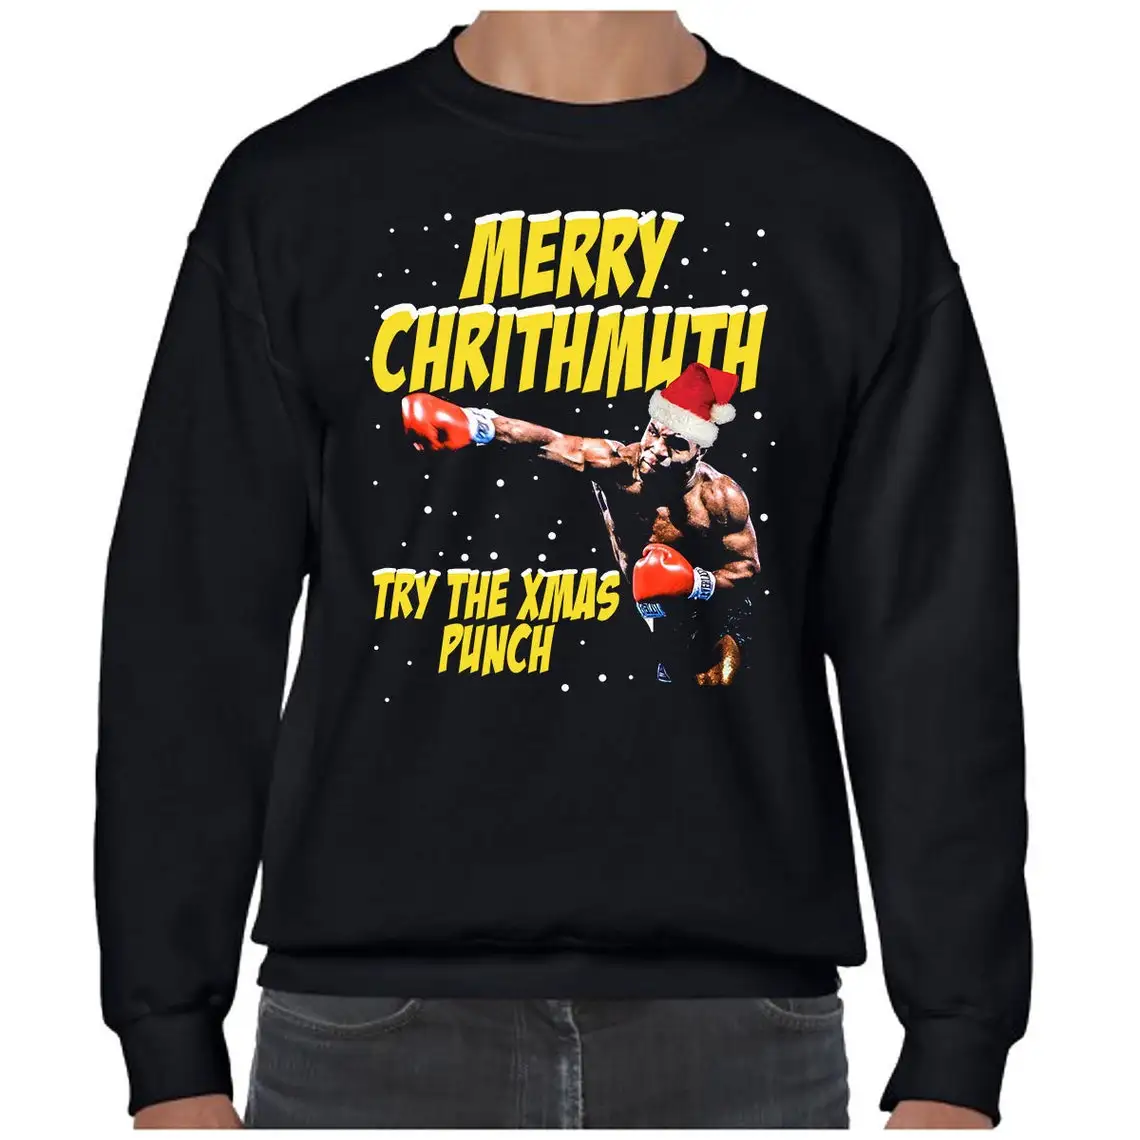 

" Try The Xmas Punch " Boxing Fighter Mike Tyson Sweatshirt New 100% Cotton Comfortable Casual Mens Fashion Christmas Streetwear